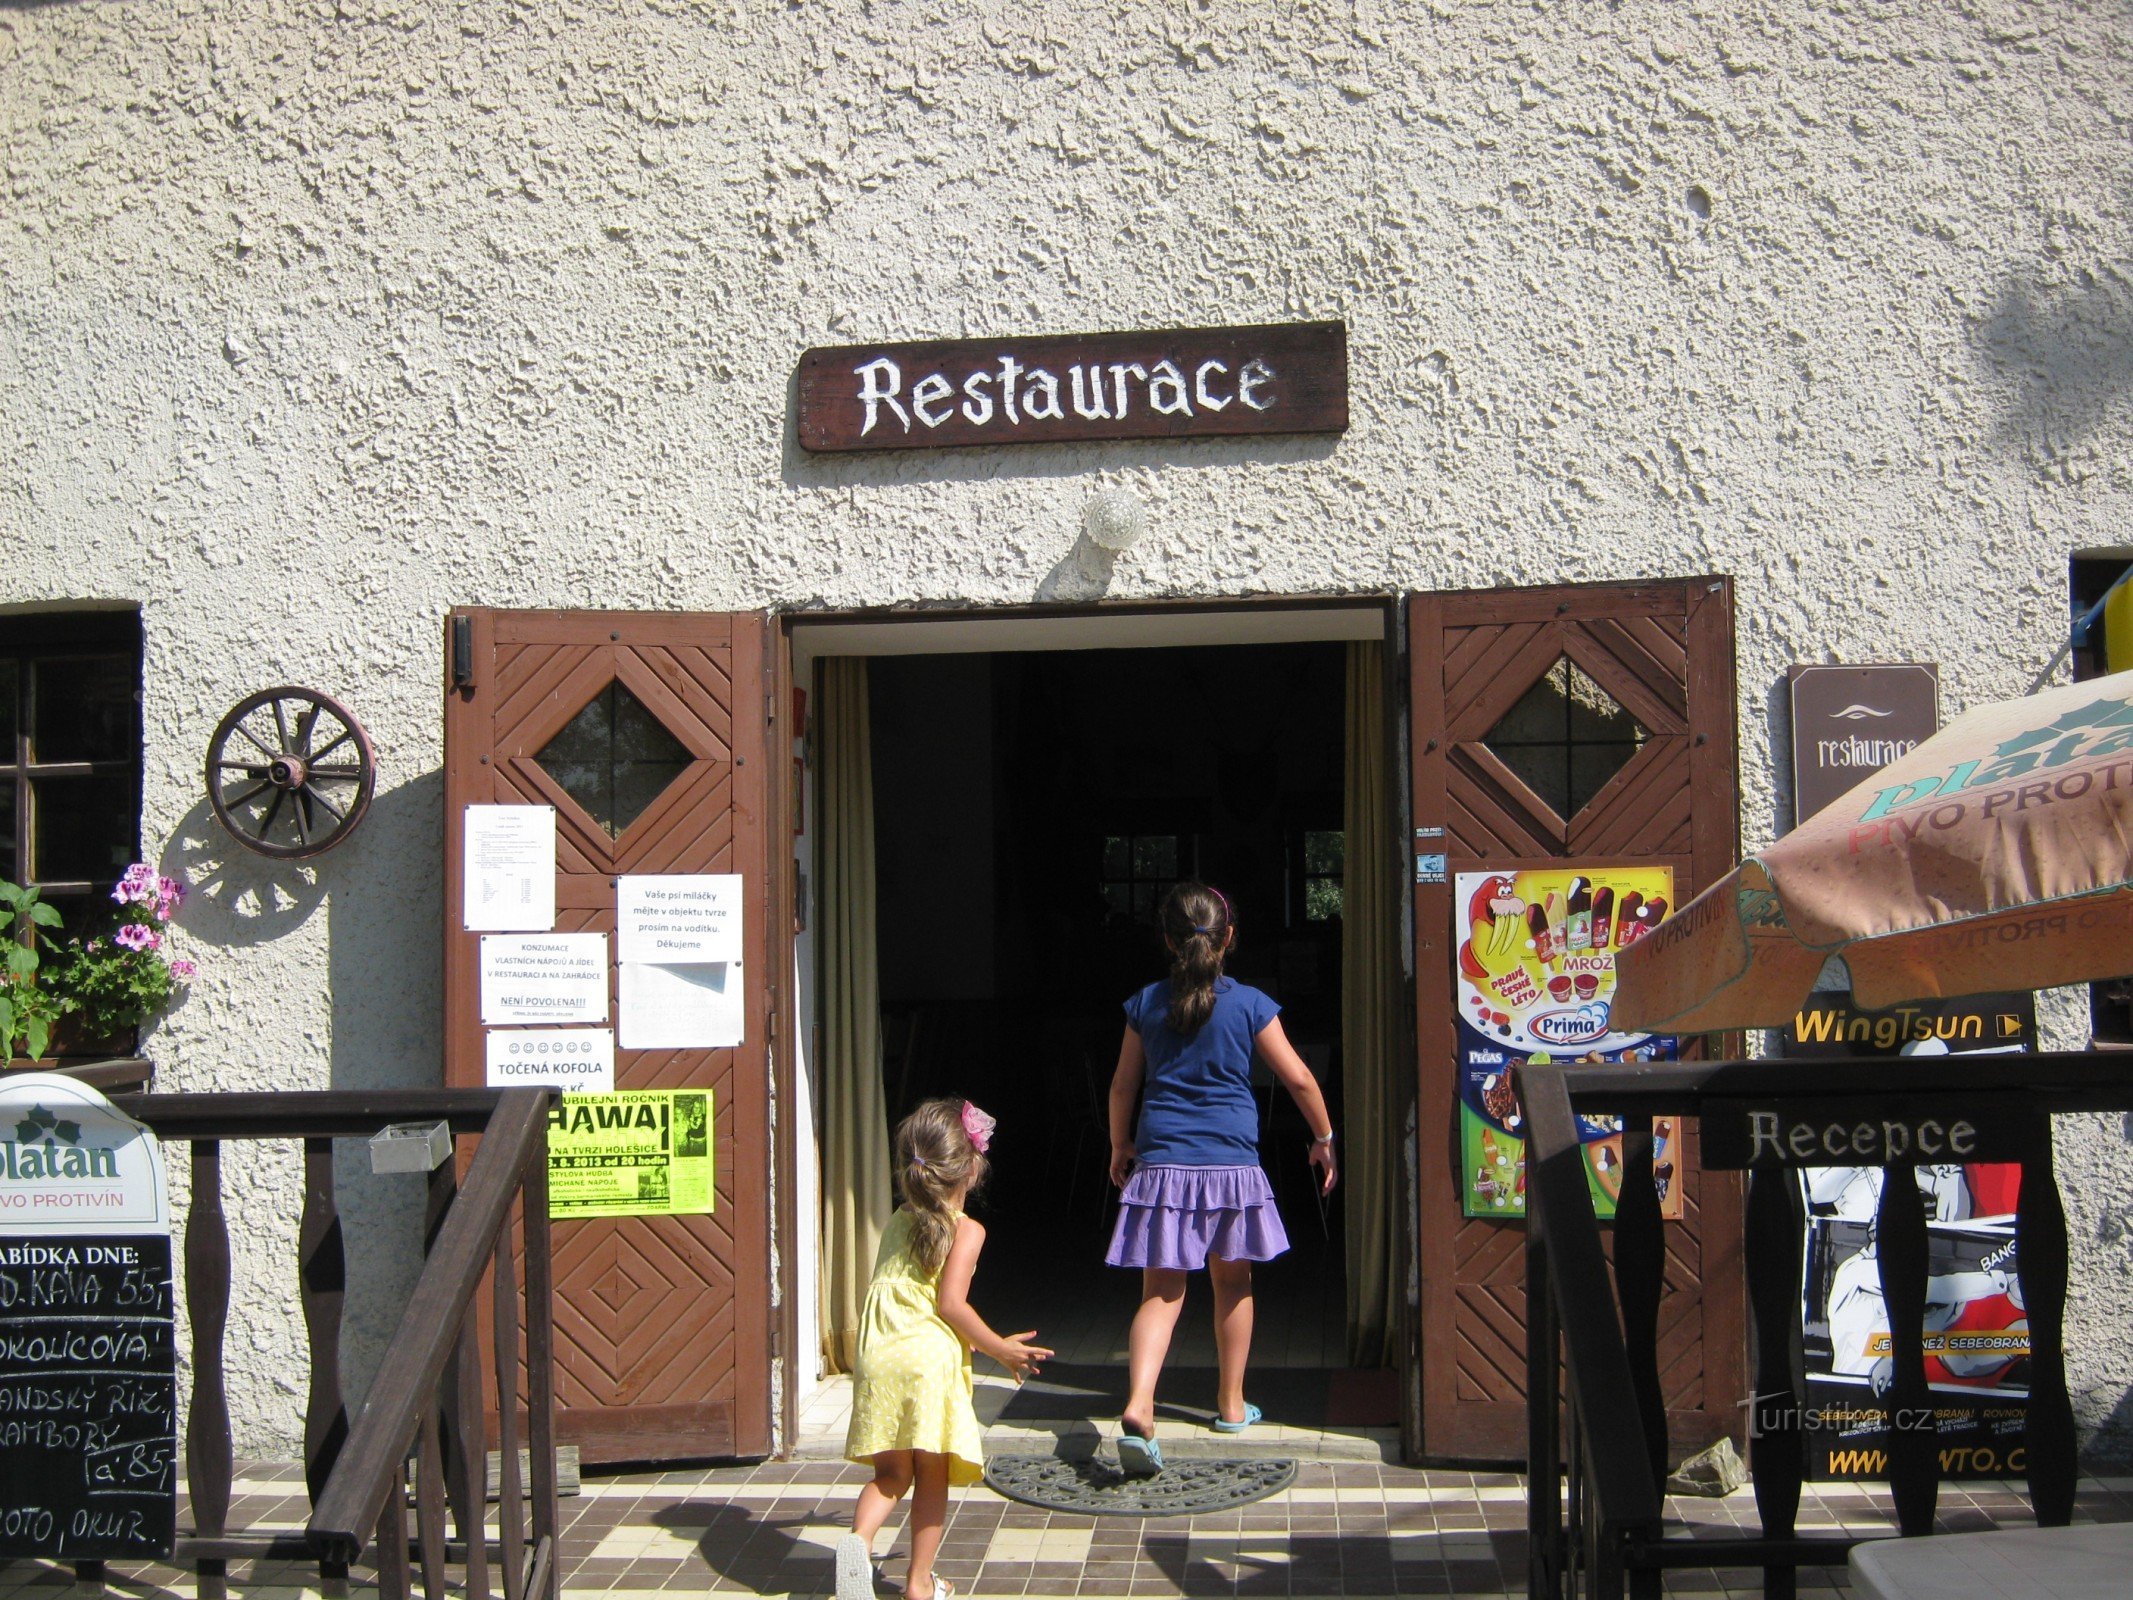 Entrance to the restaurant